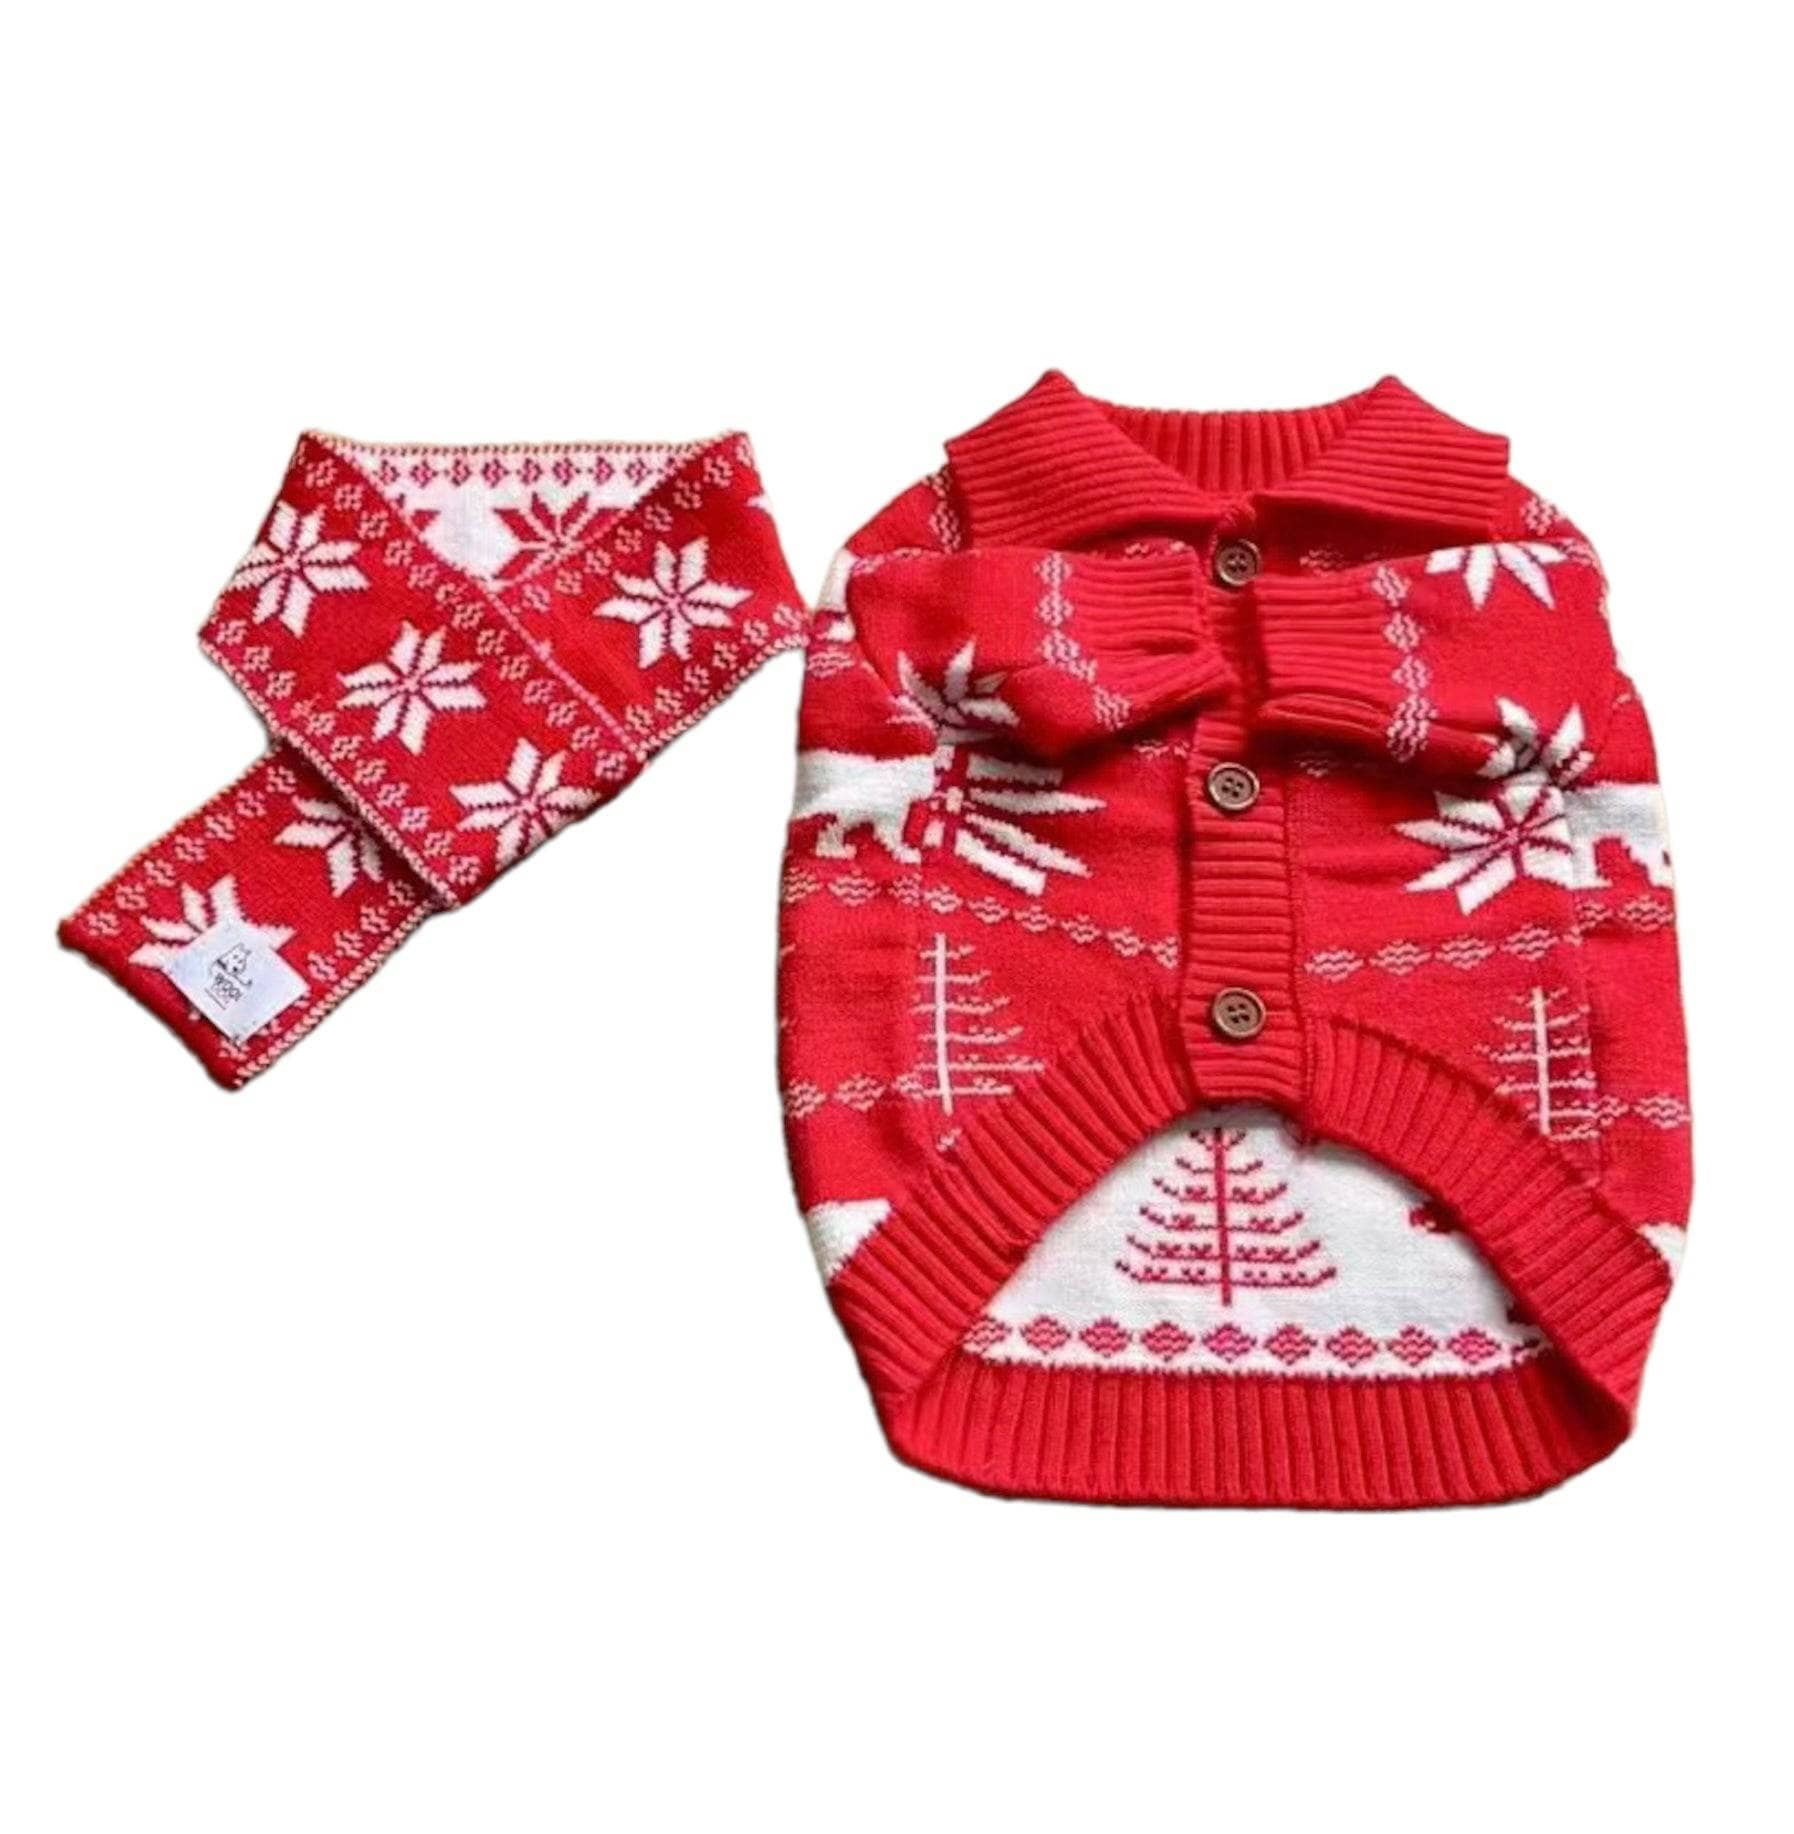 Doggie Holiday Sweater and Scarf